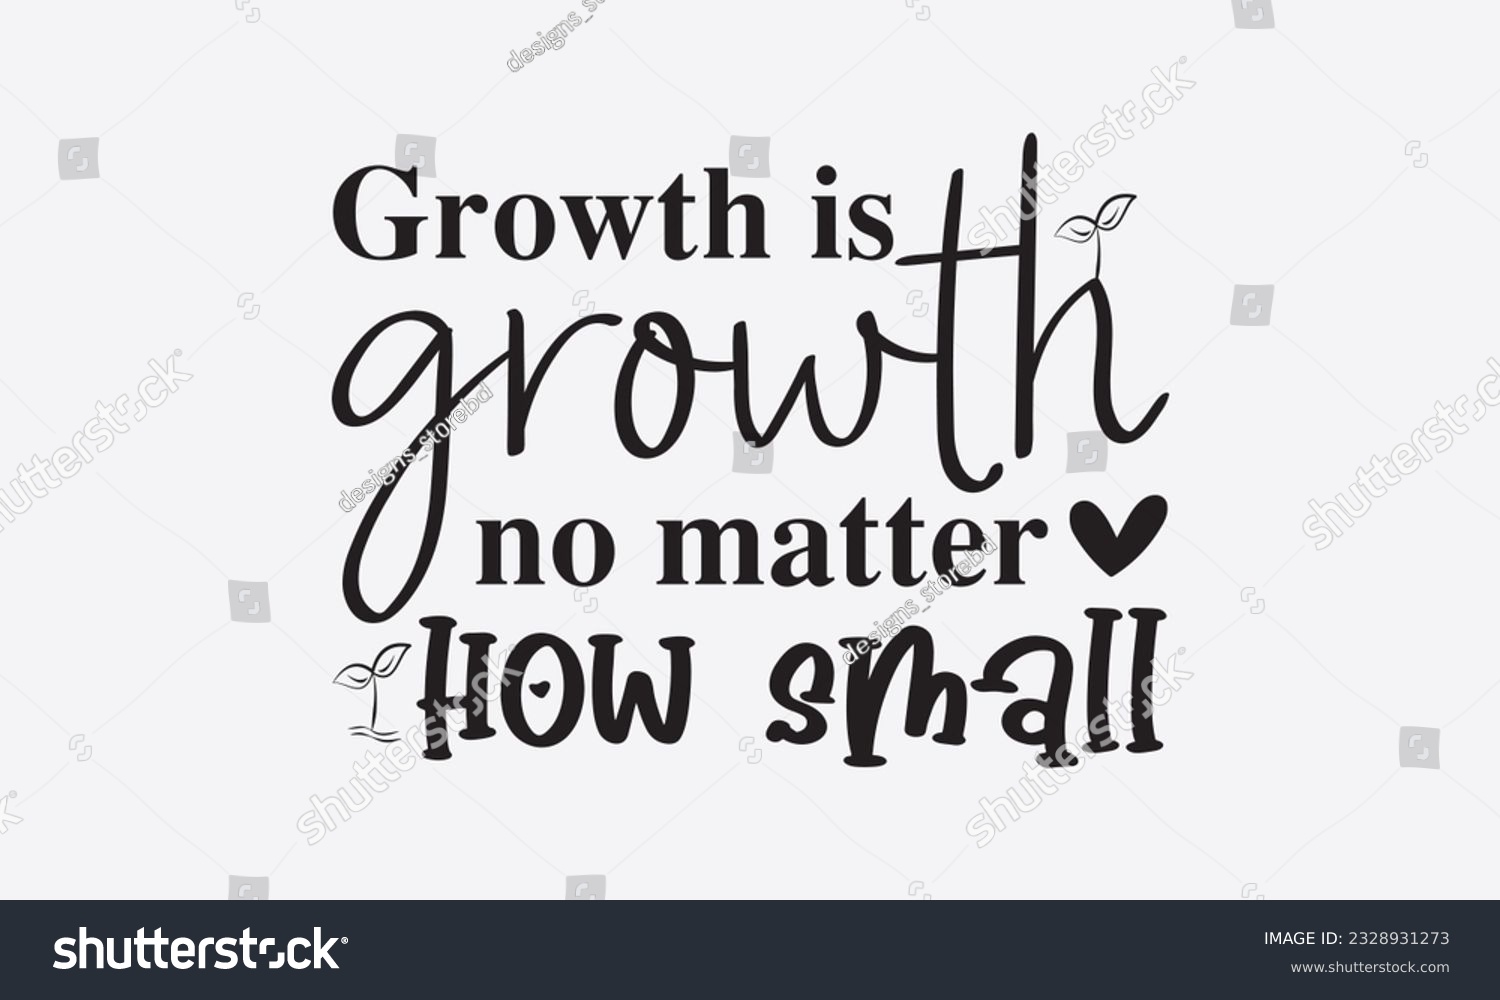 SVG of Growth is growth no matter how small svg,Inspirational Quotes Bundle Svg, Motivational Svg Bundle, Writer svg typography t-shirt design, Hand Lettered,Silhouette, Cameo, Png, Eps, Dxf, Cricut Cut File svg